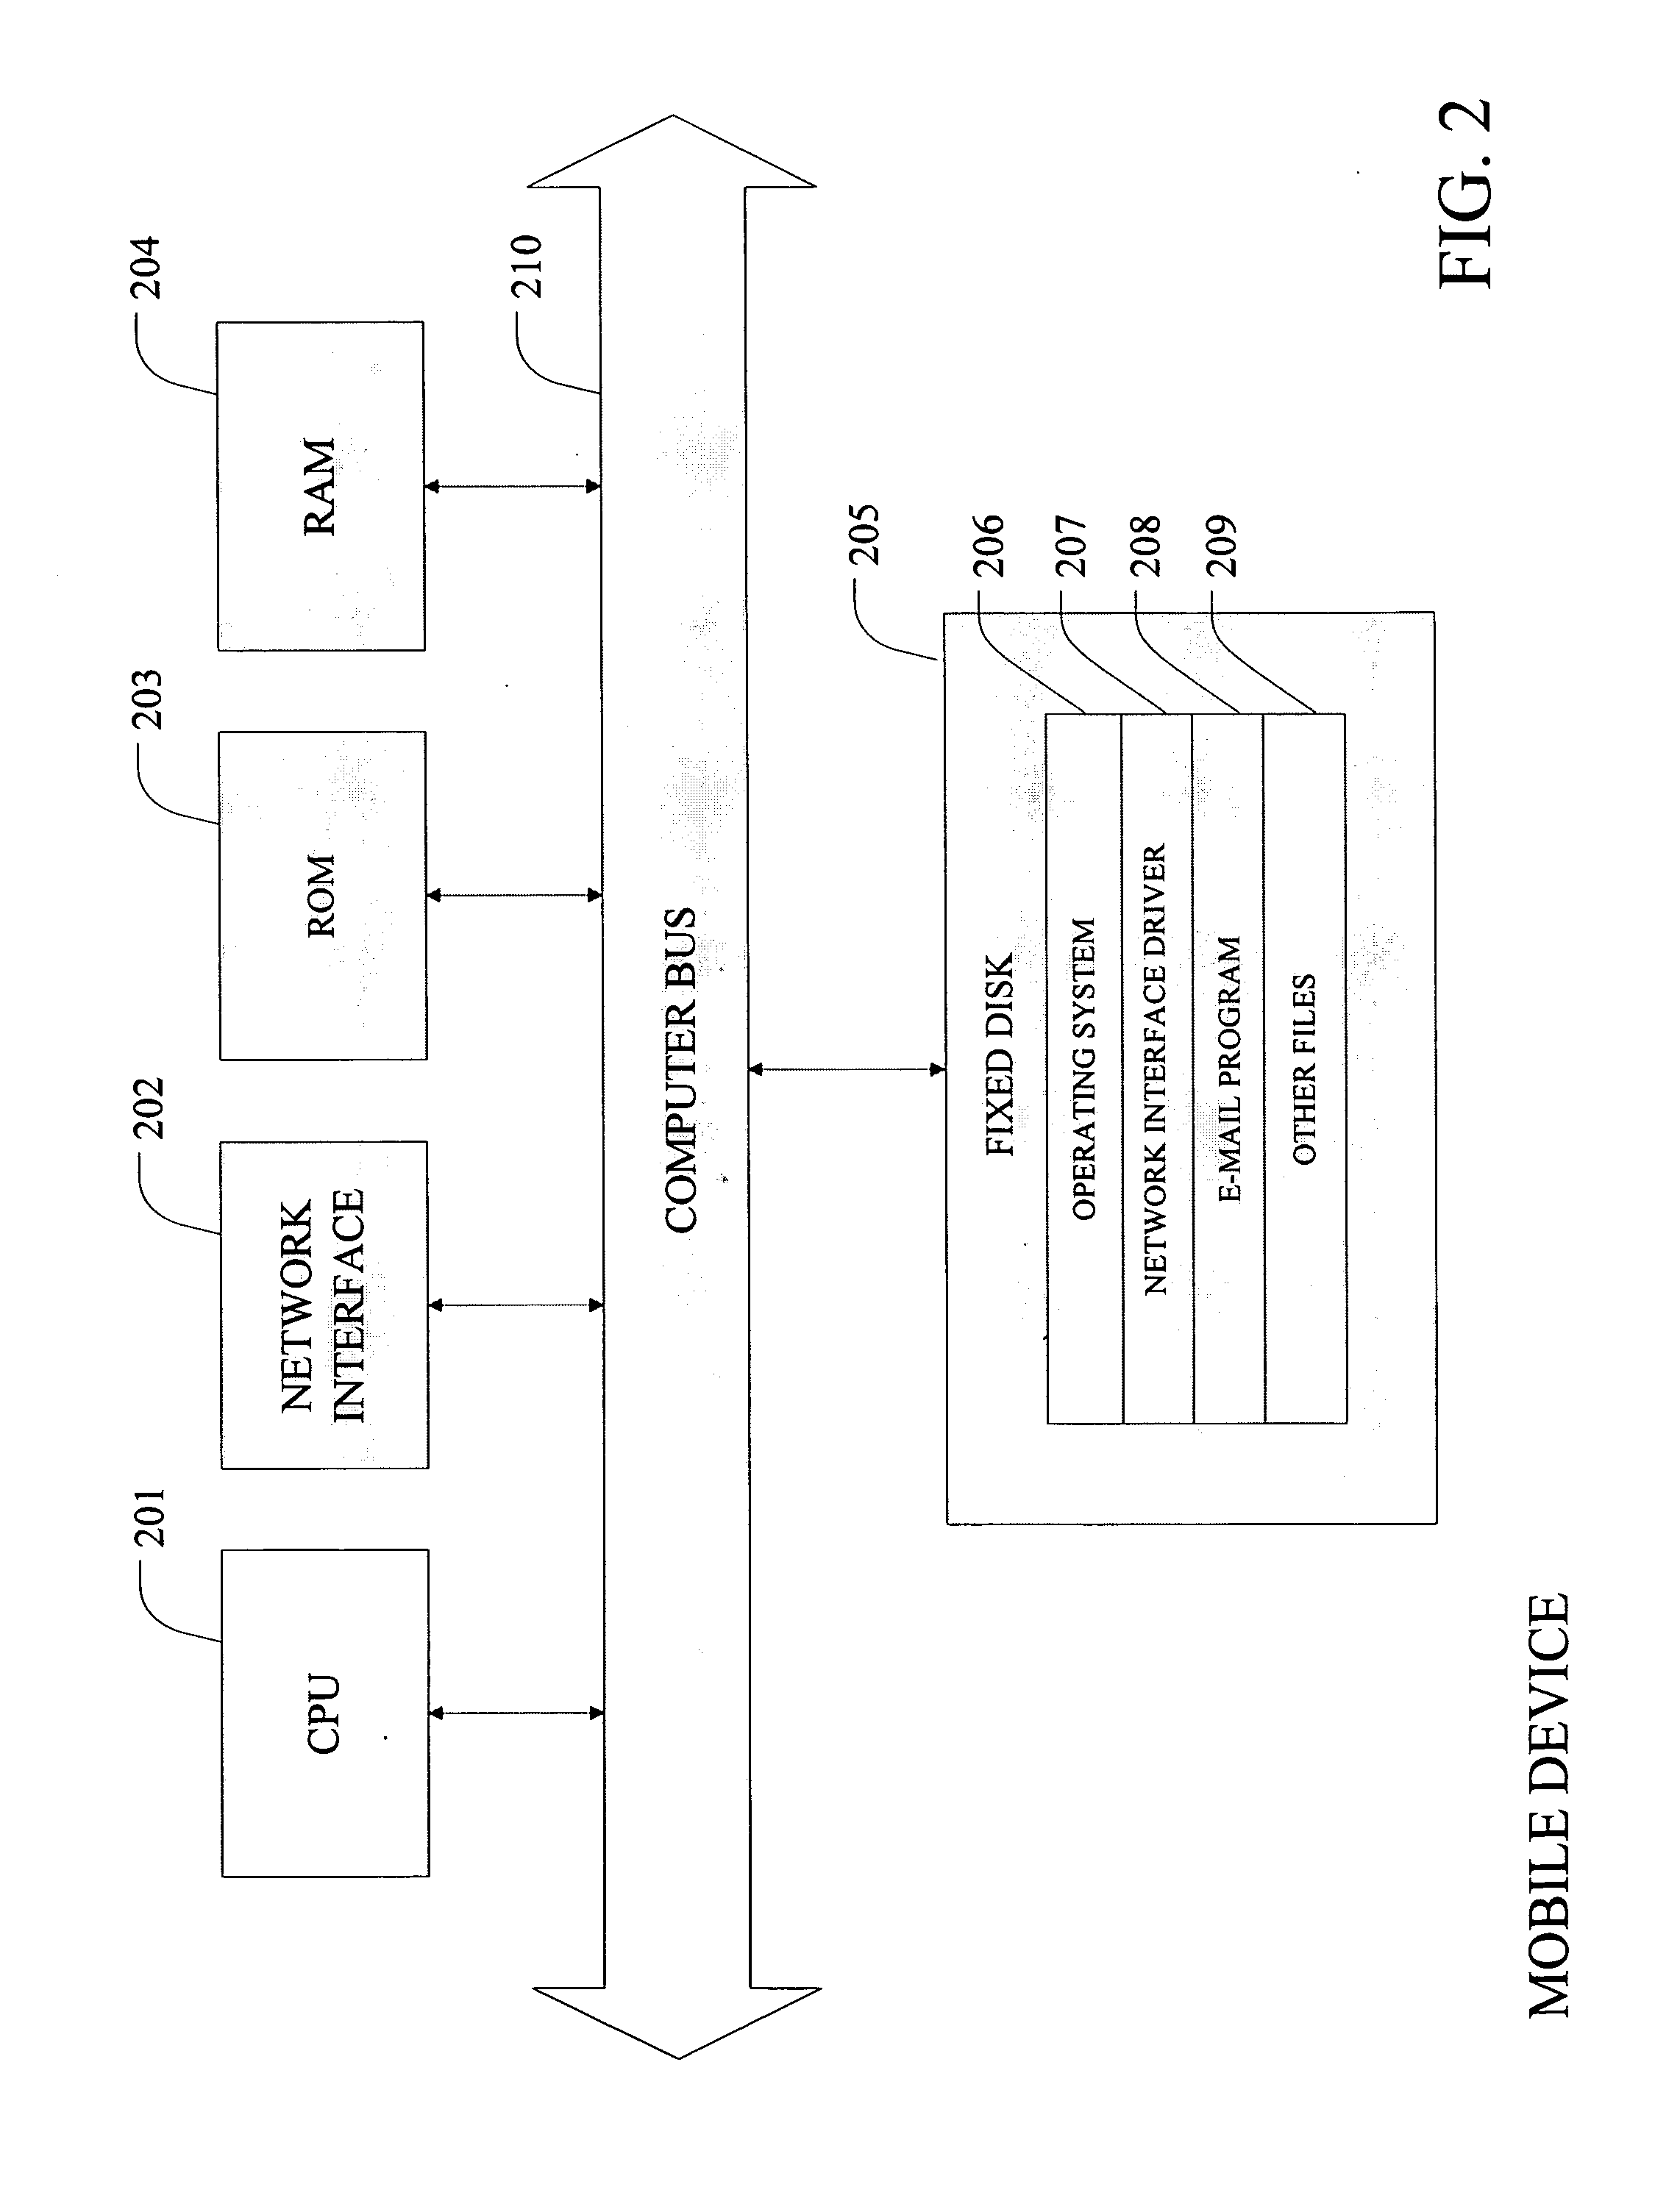 Method and system for printing electronic mail